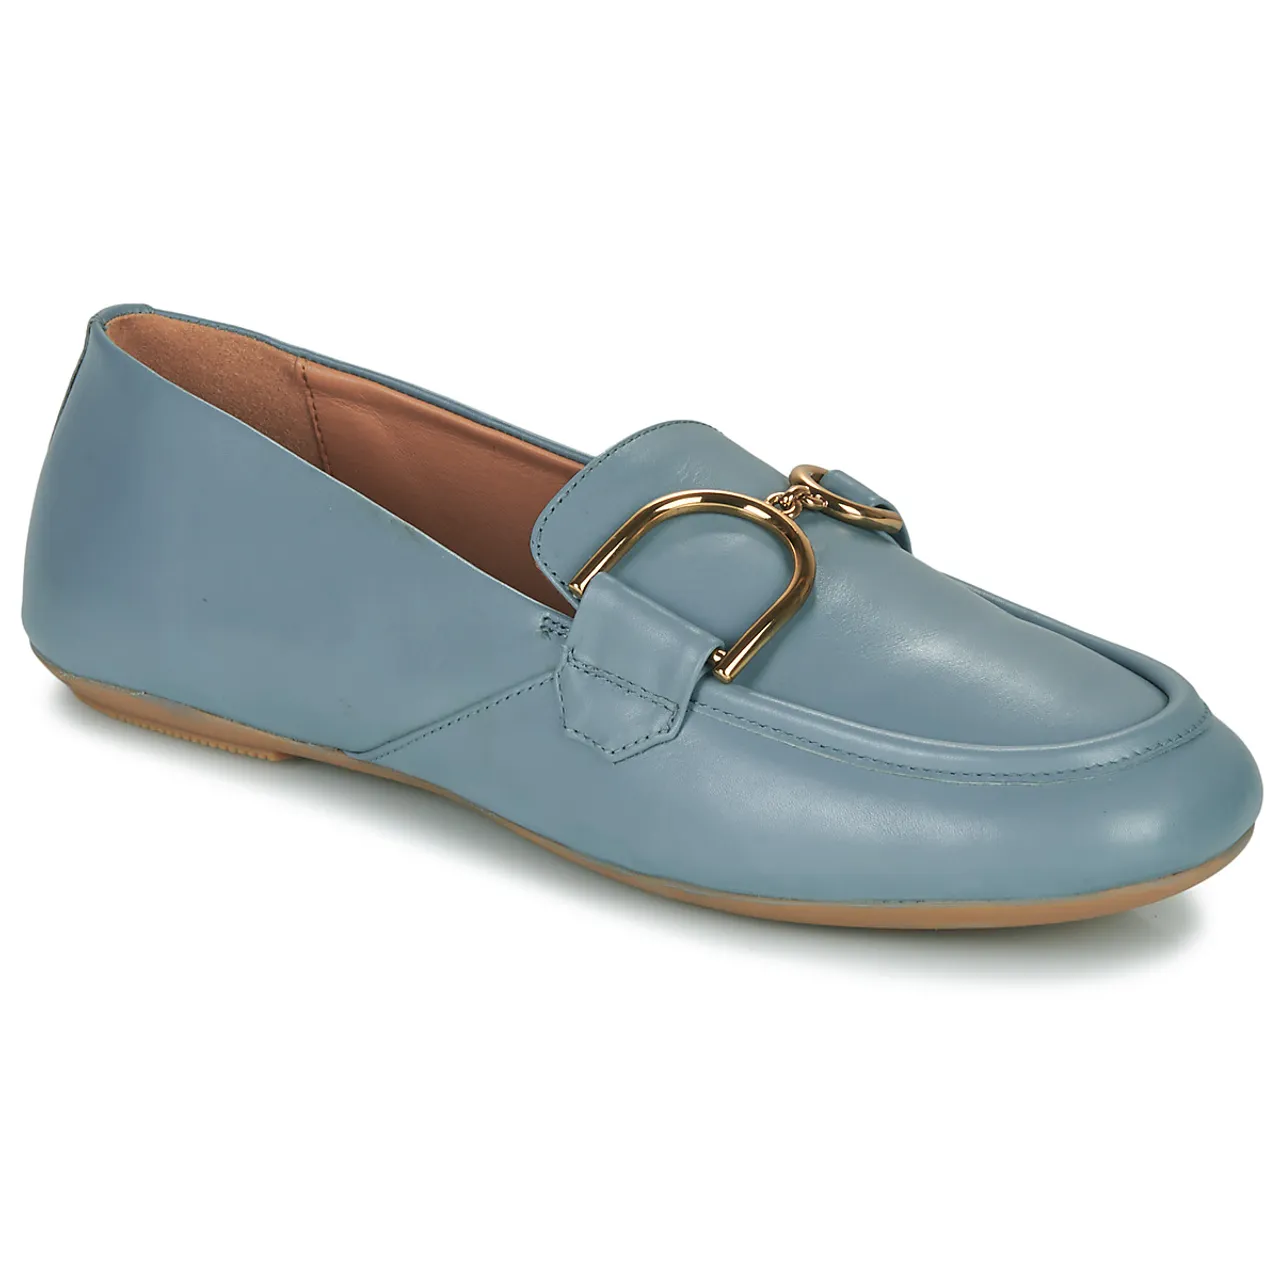 Geox  D PALMARIA  women's Loafers / Casual Shoes in Blue